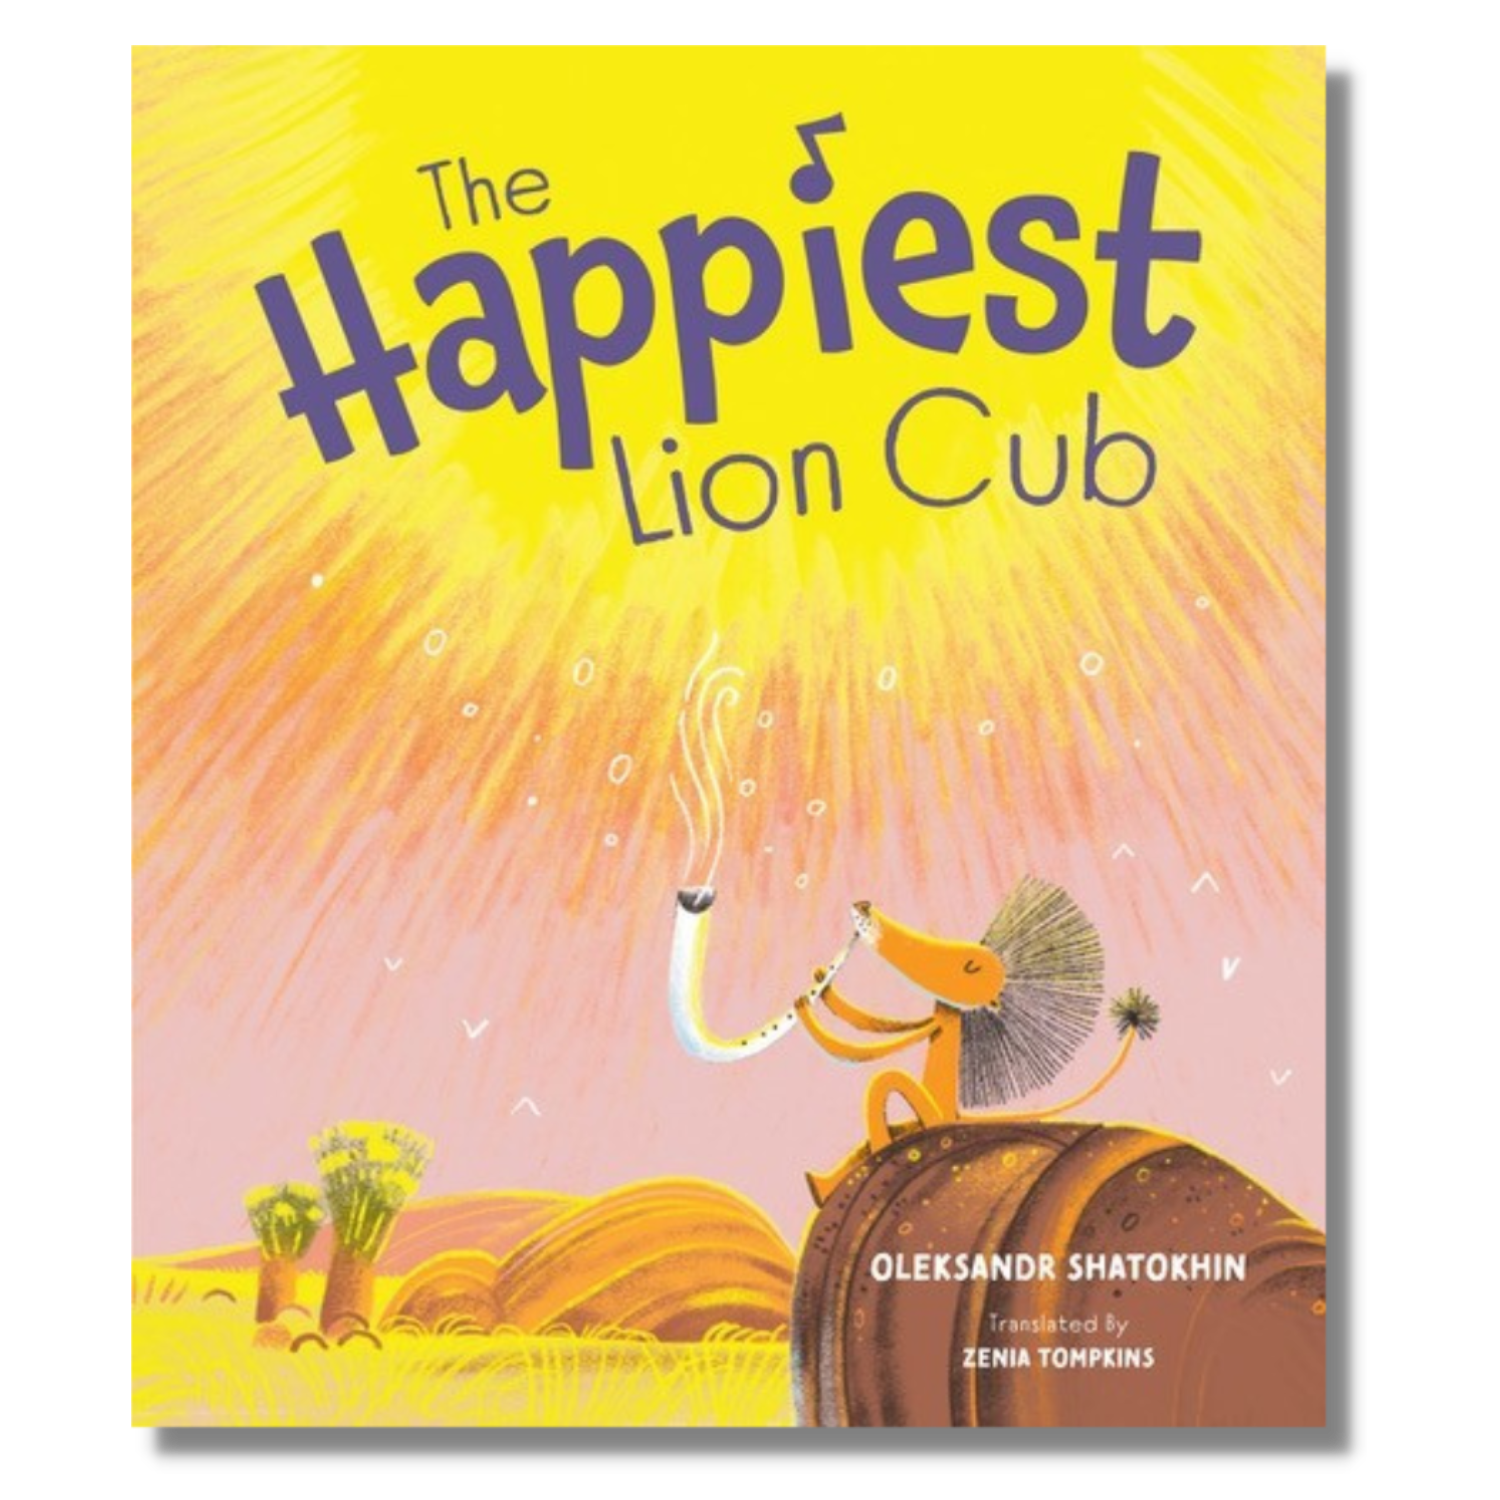 The cover of "The Happiest Lion Cub"